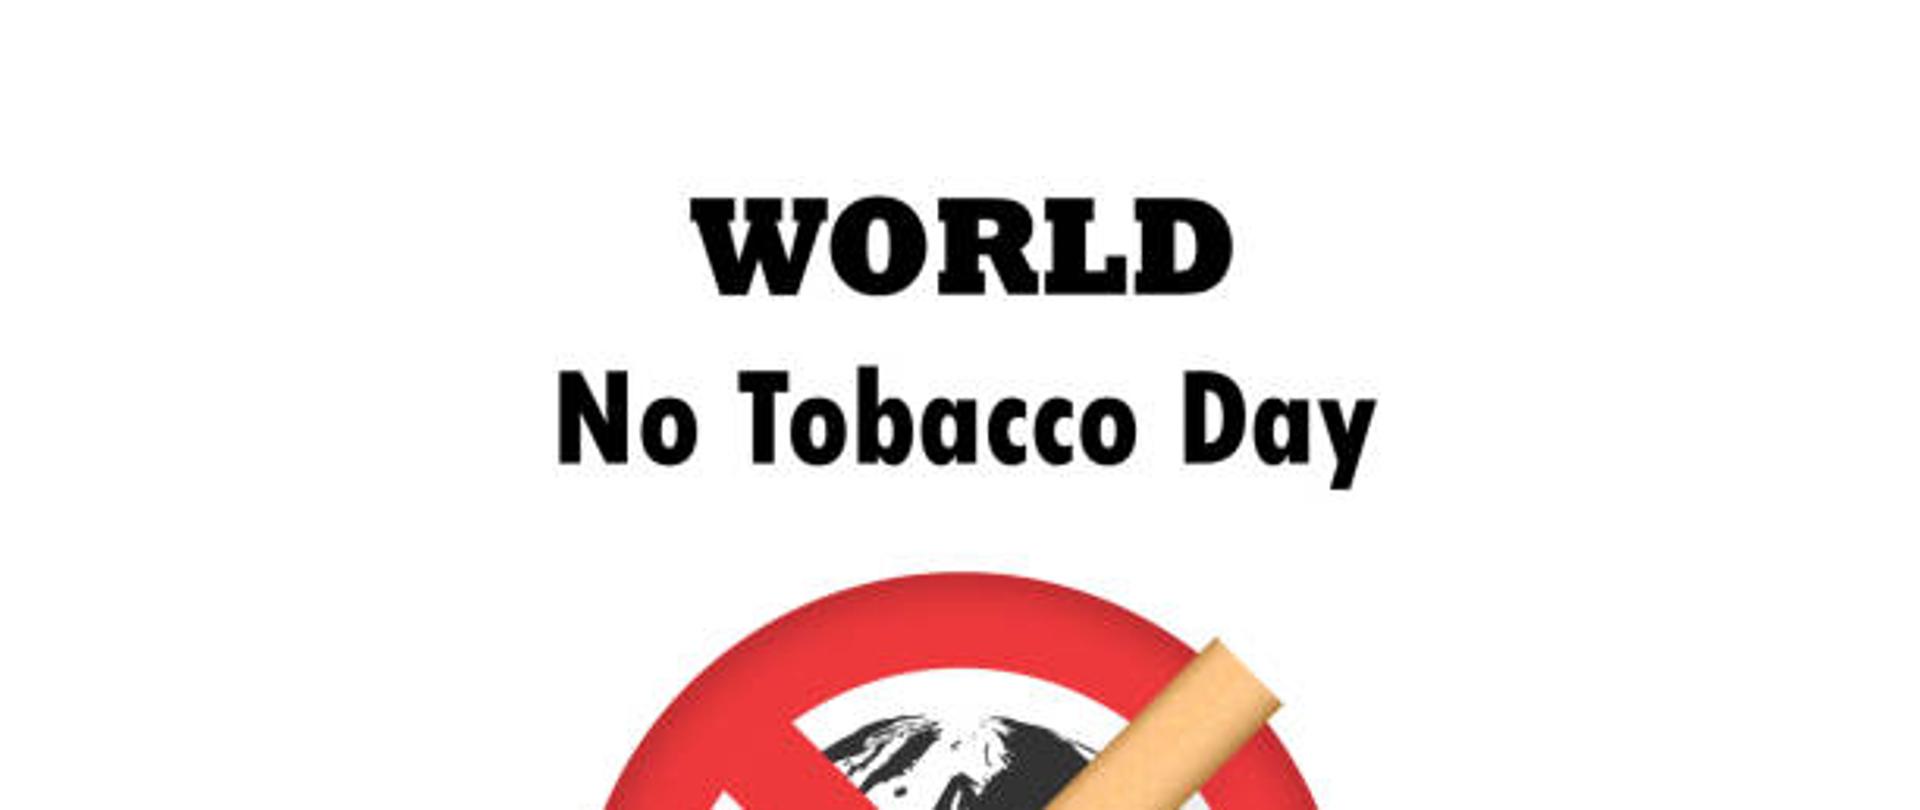 World map icon and Quit Tobacco sign.World no tobacco day.No Smoking Day Awareness.Vector illustration.